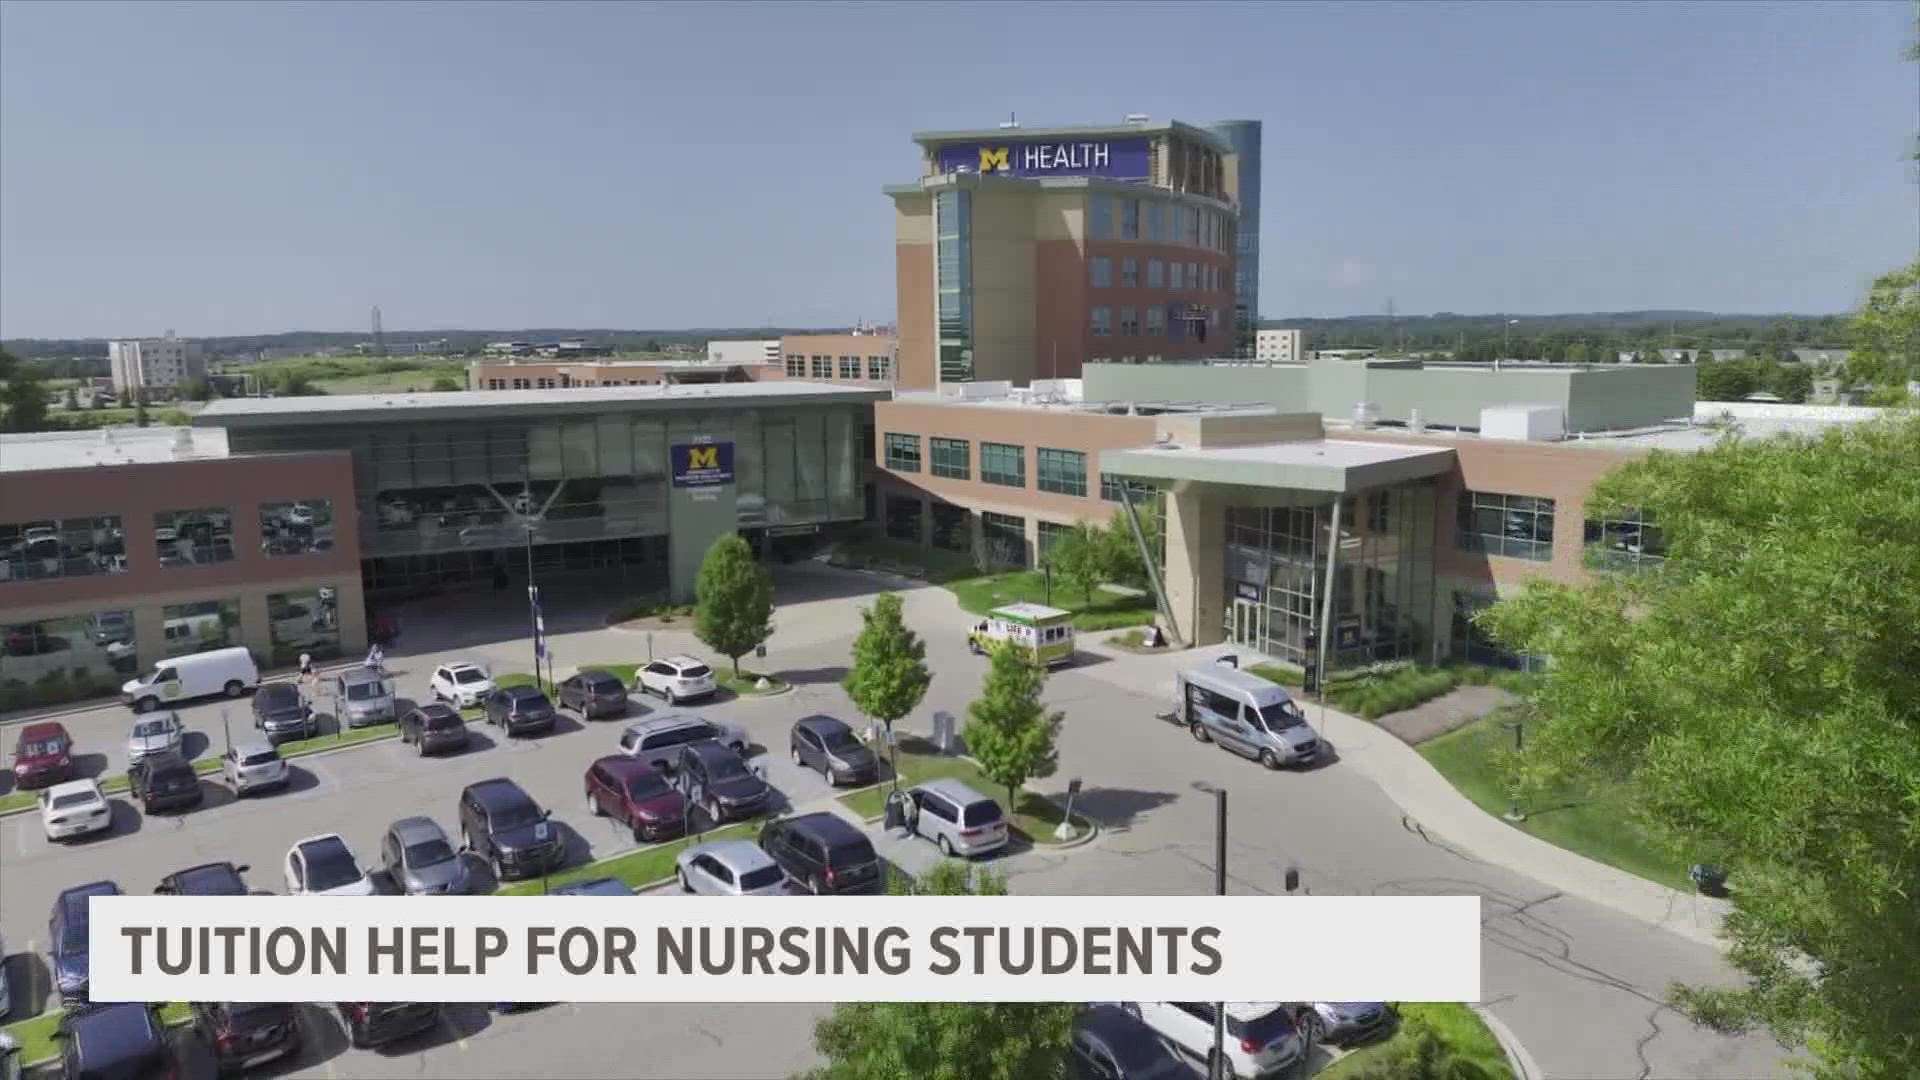 The University of Michigan Health-West and Grand Rapids Community College partnered to provide tuition assistance to help fix the nursing shortage.